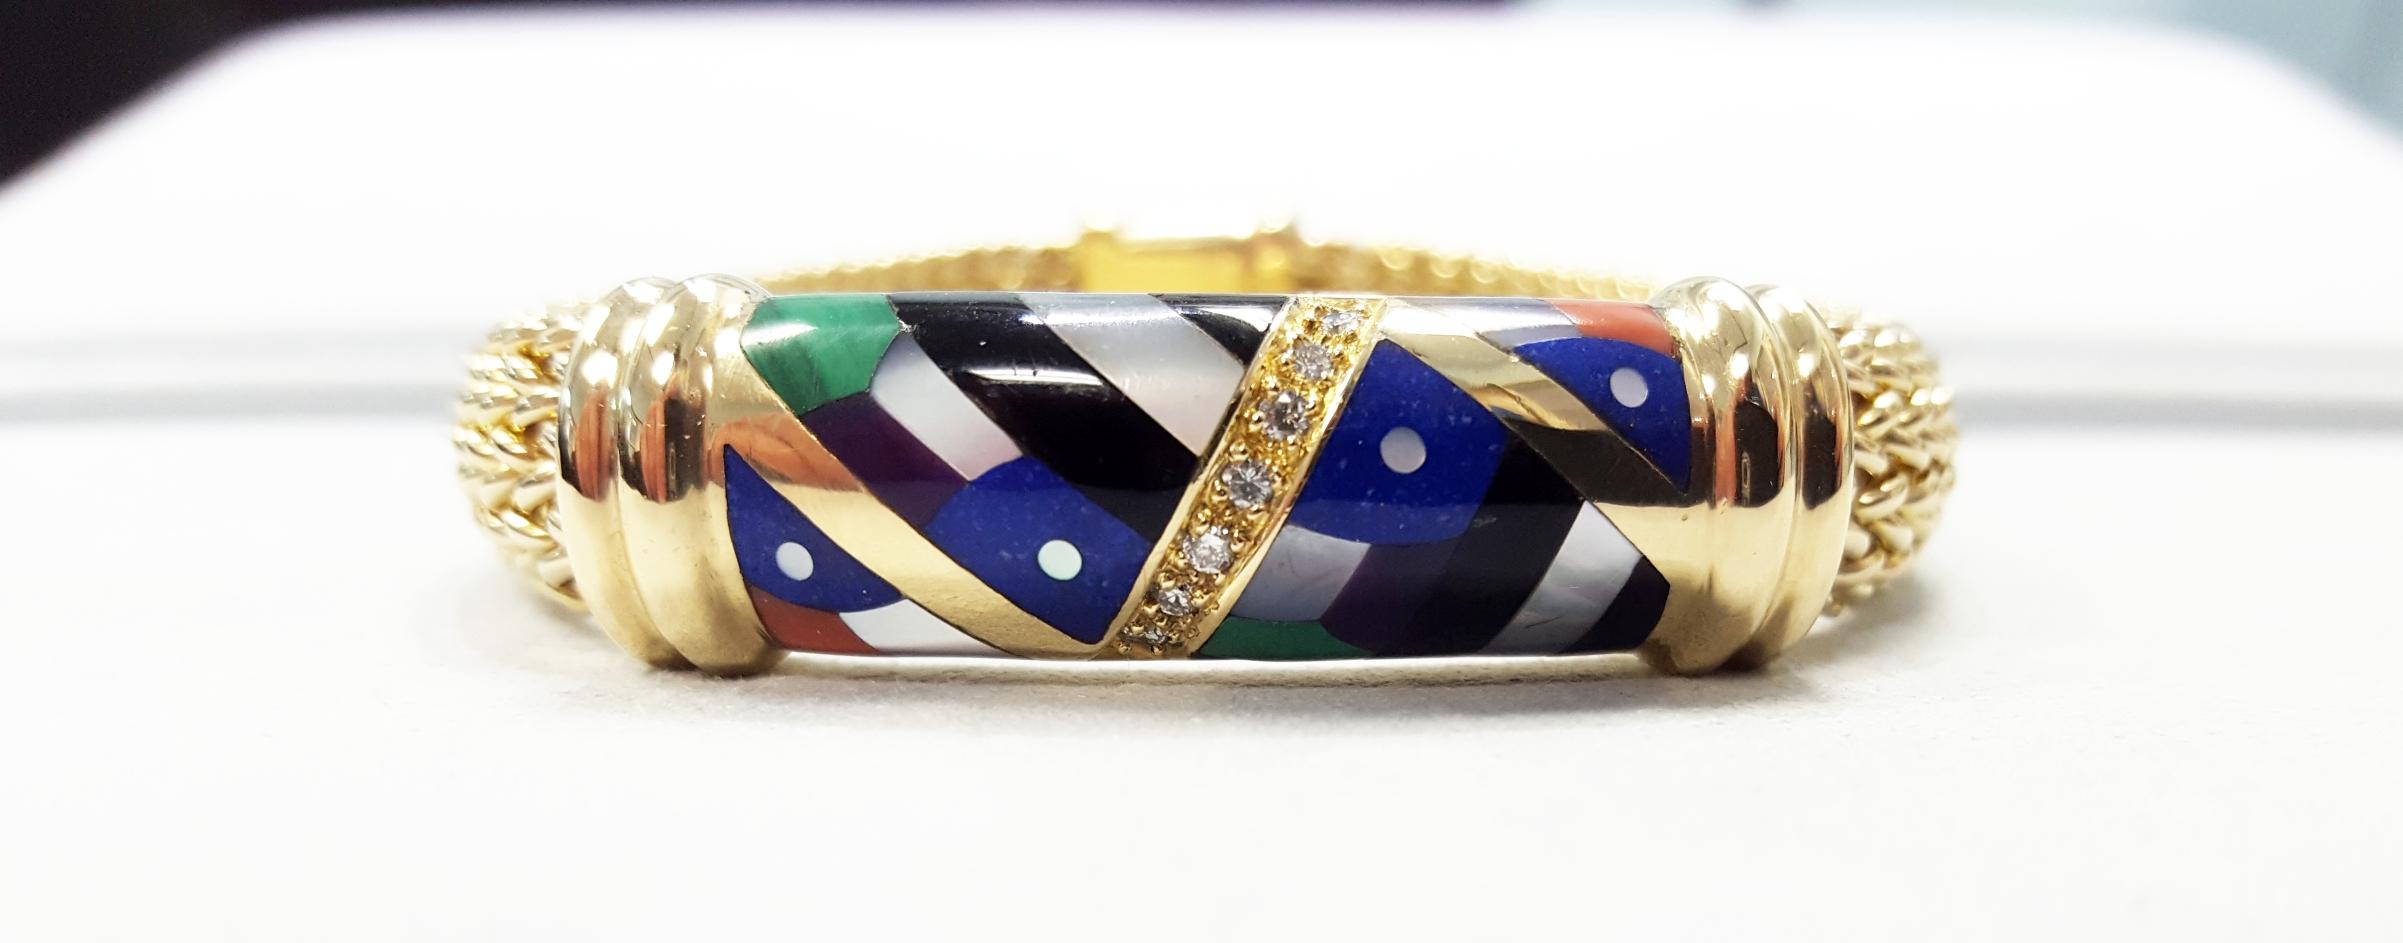 A yellow gold Asch Grossbadt mesh bracelet. The bracelet is inlaid with Black Onyx, Mother of Pearl, Lapis, Malachite, and Coral. The bracelet is also set with 7 Round Brilliant cut diamonds that weigh 0.15cttw. The Bracelet measures 7 inches long